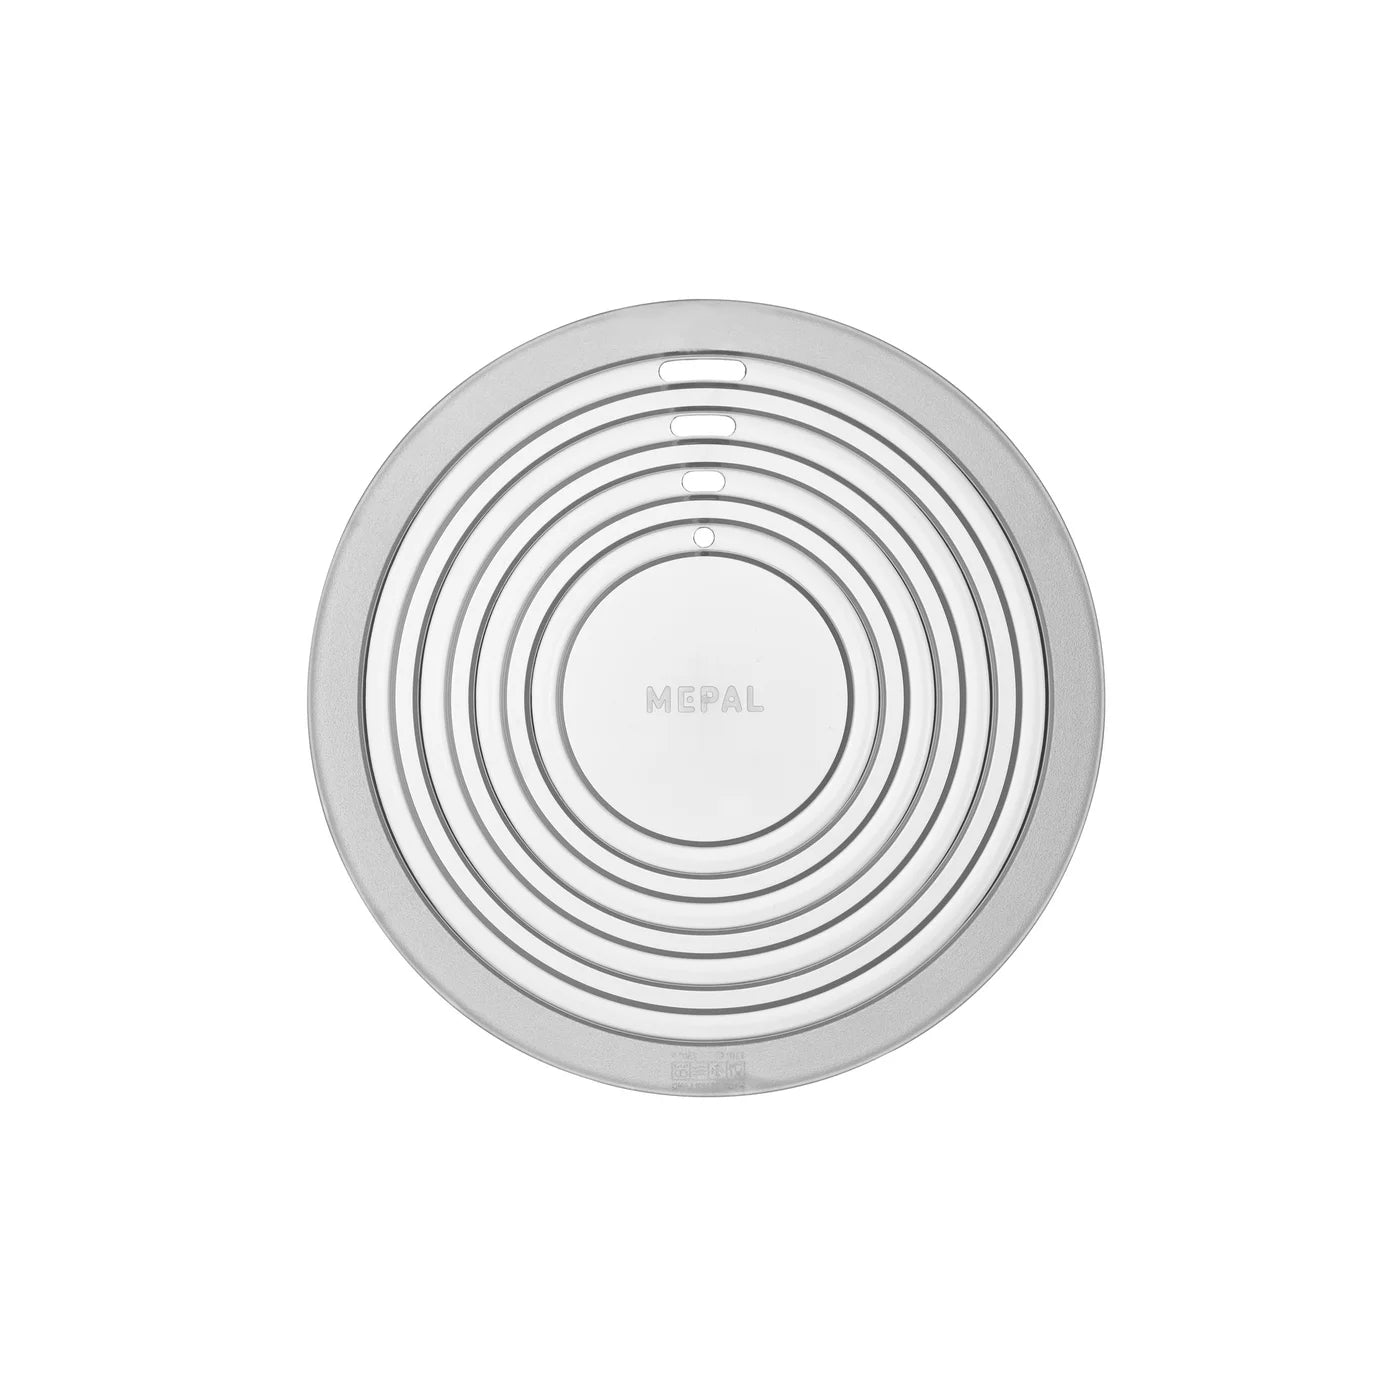 Mepal CIRQULA Microwave Cover Round - KitchenEnvy